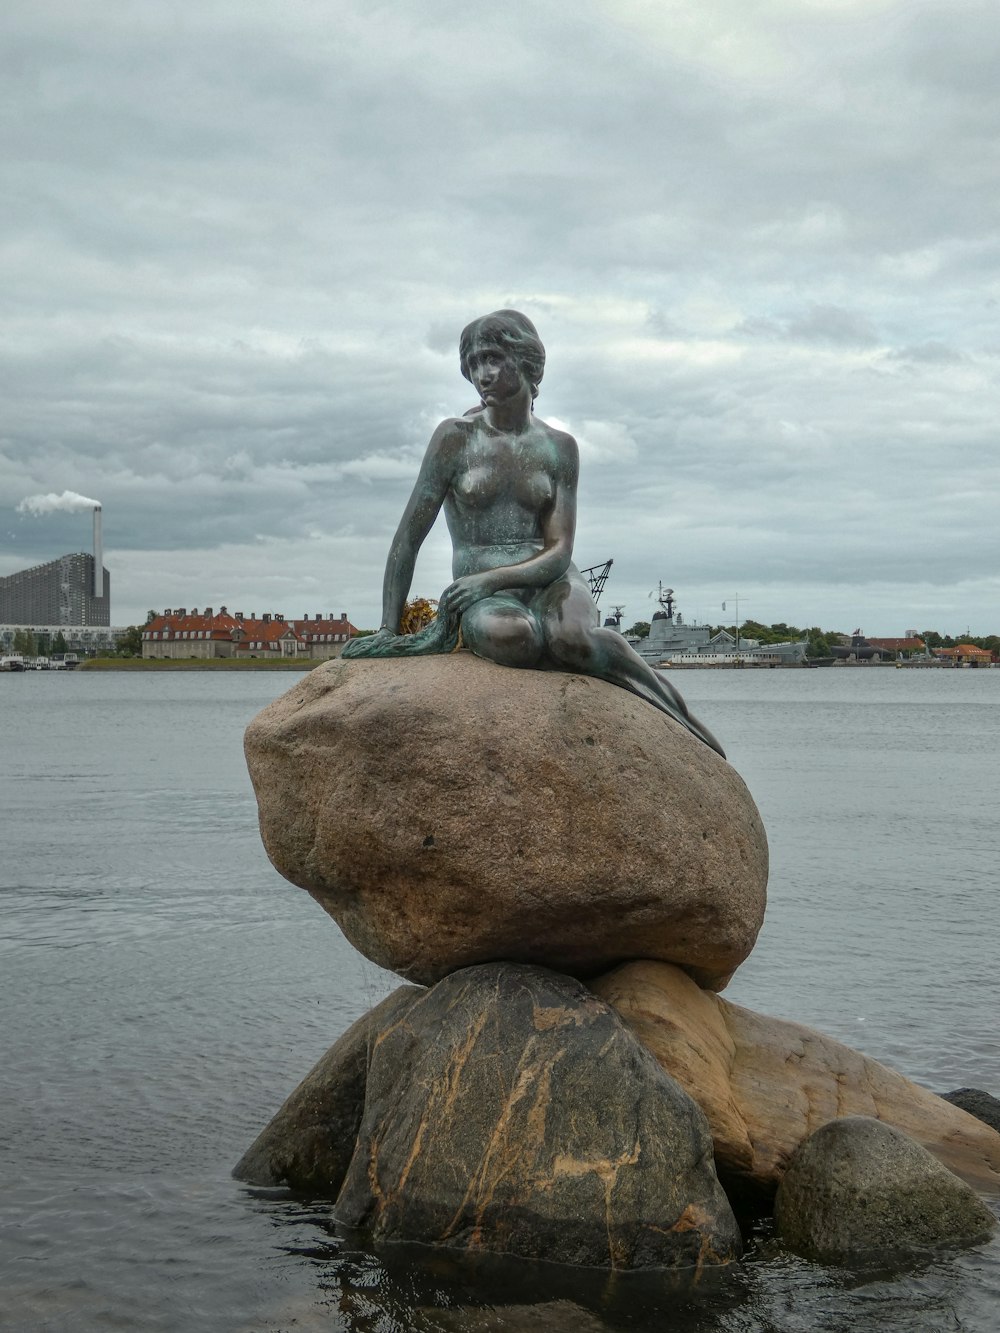 a statue of a man sitting on a rock in the water with The Little Mermaid in the background